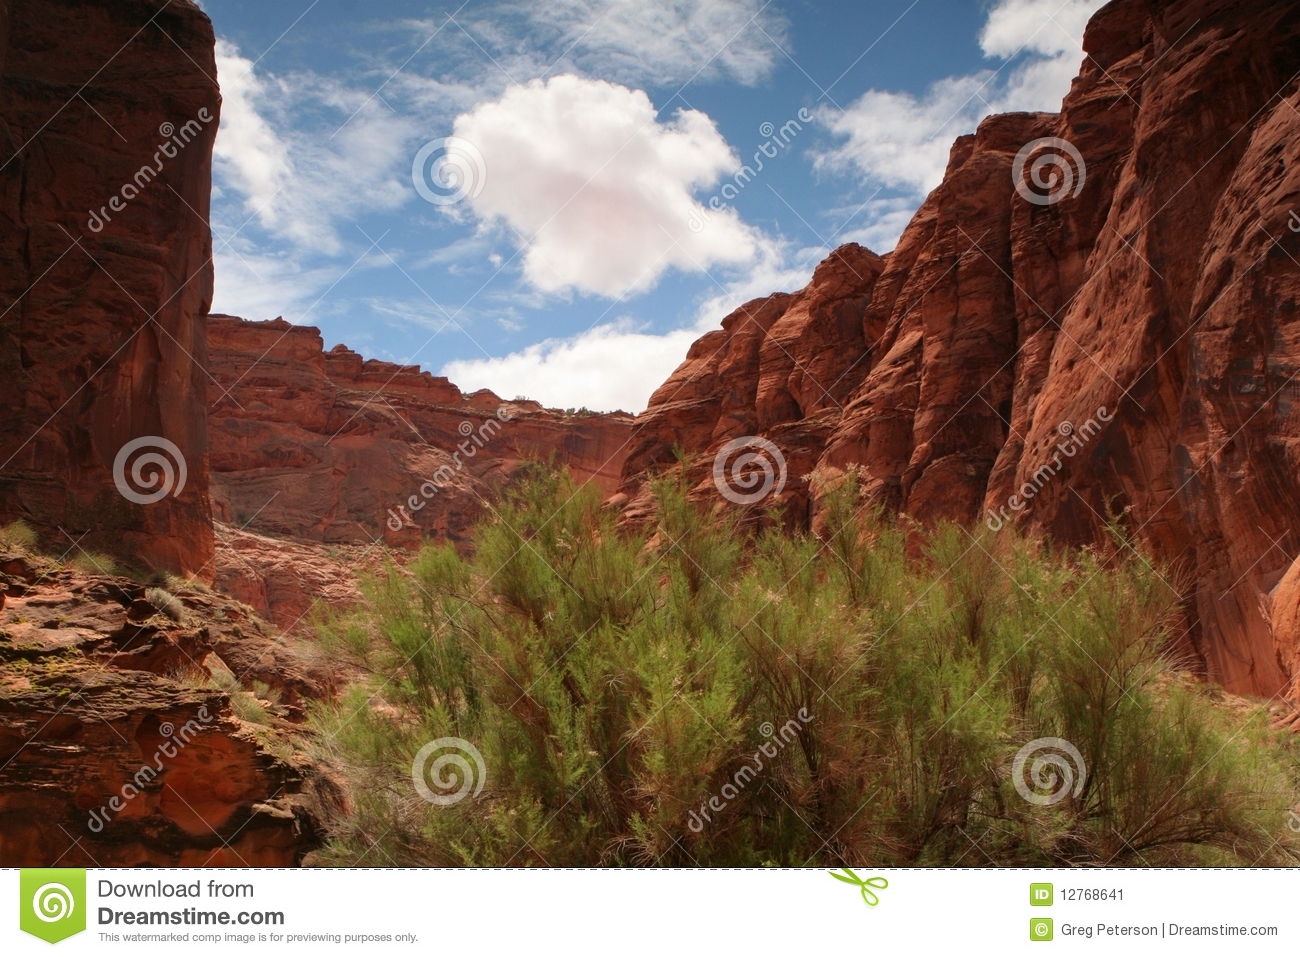 Blue Skies Over Red Sandstone Canyons In The Desert Of Southern Utah